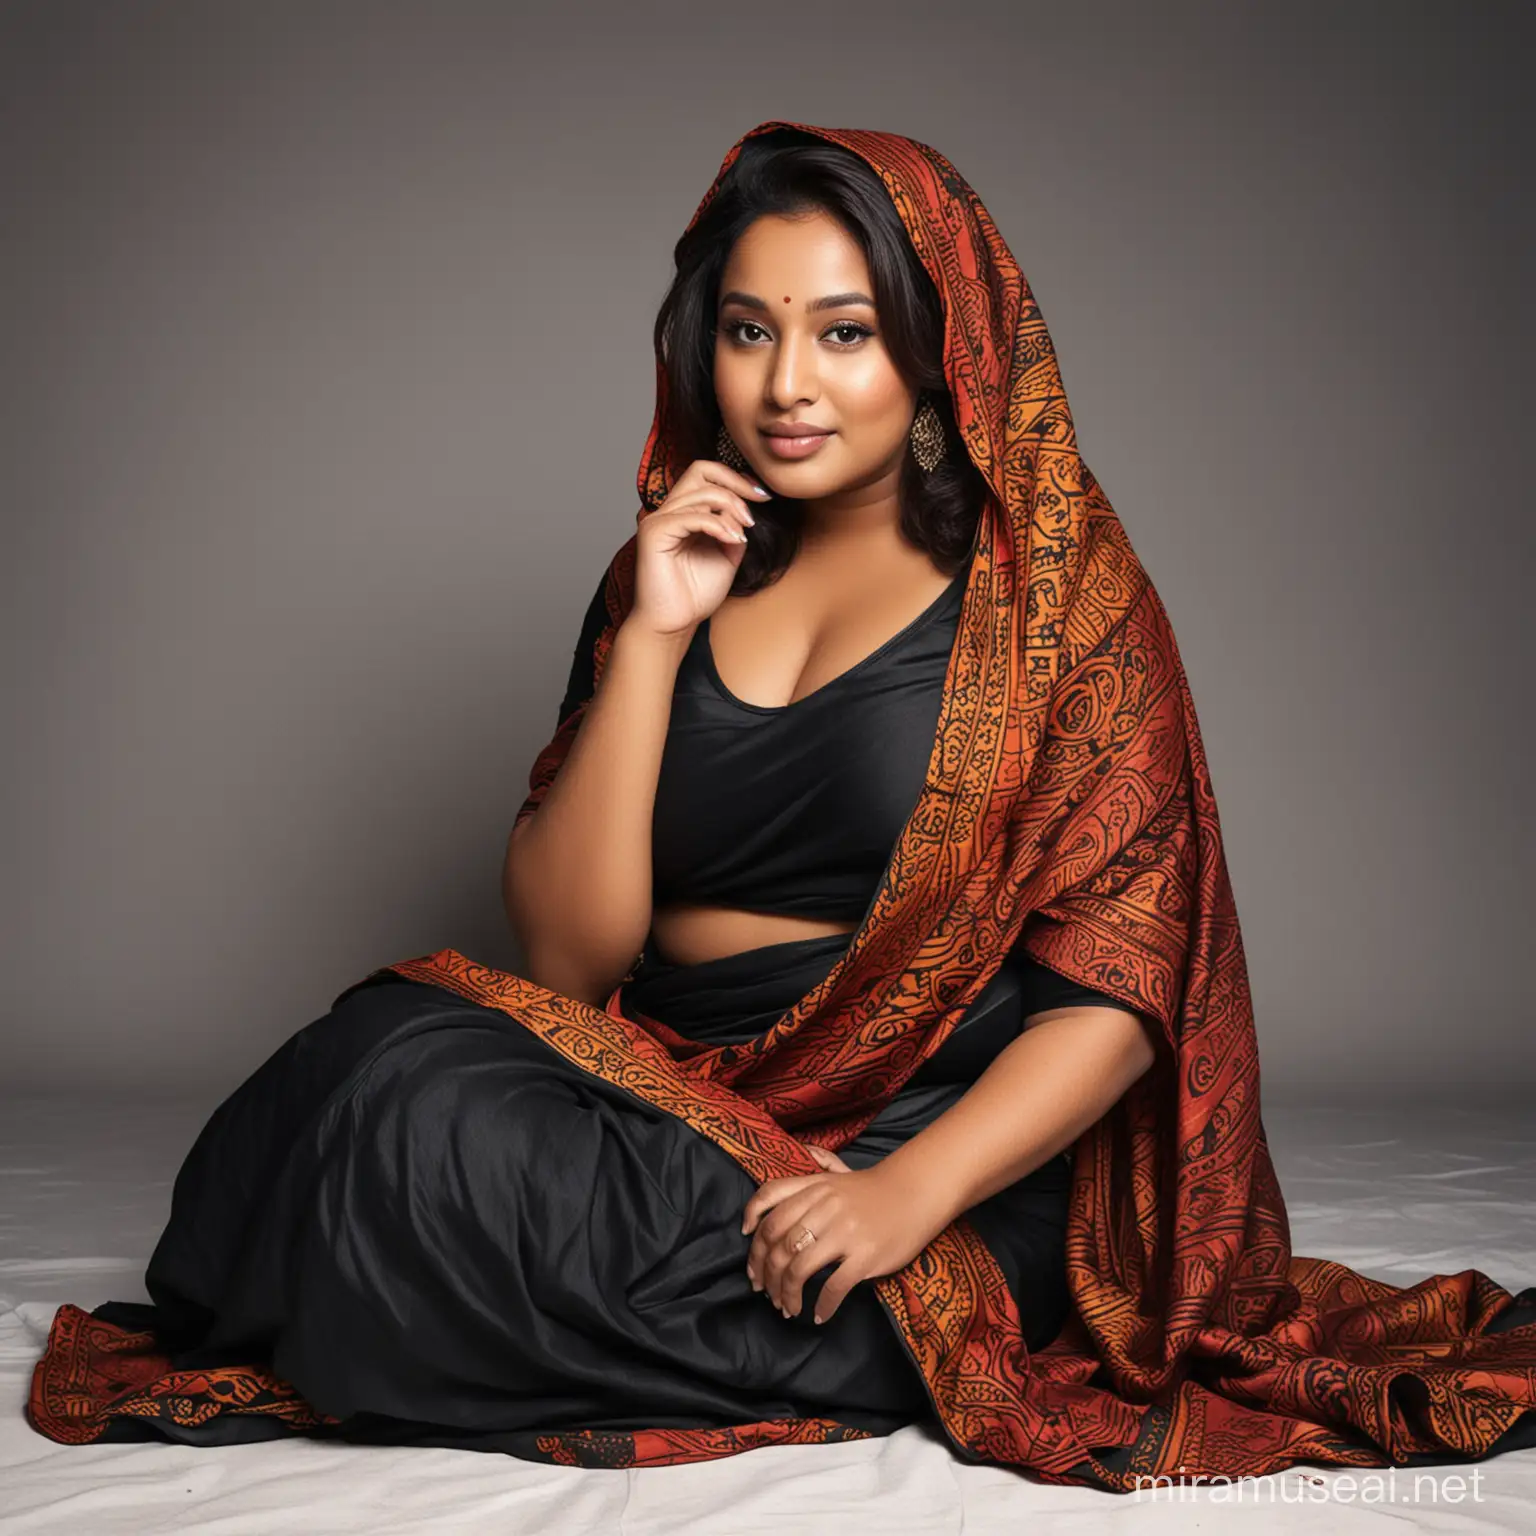 draw an authentic photo of Bangladeshi beautiful plus size black woman wearing Bangladeshi saree with hood and sitting on the floor